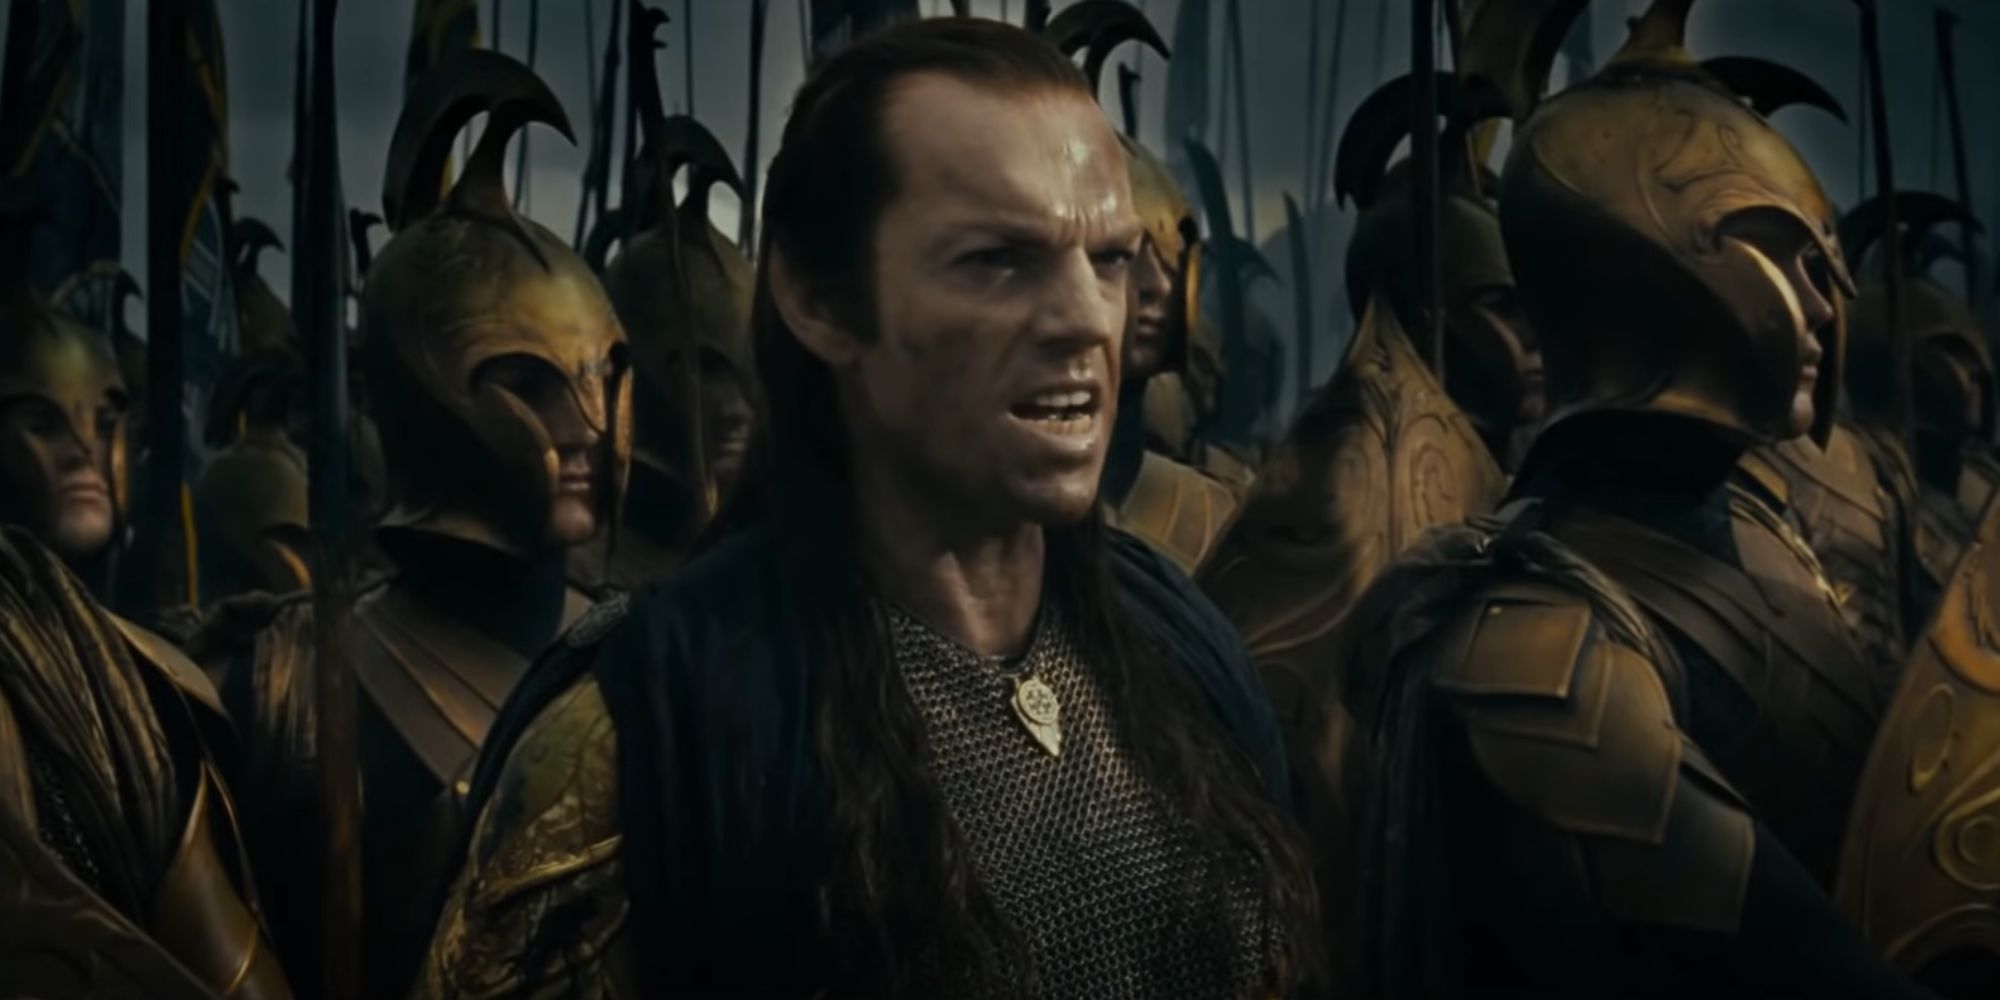 Elrond commands the elvish troops at the Battle of Gorgoroth